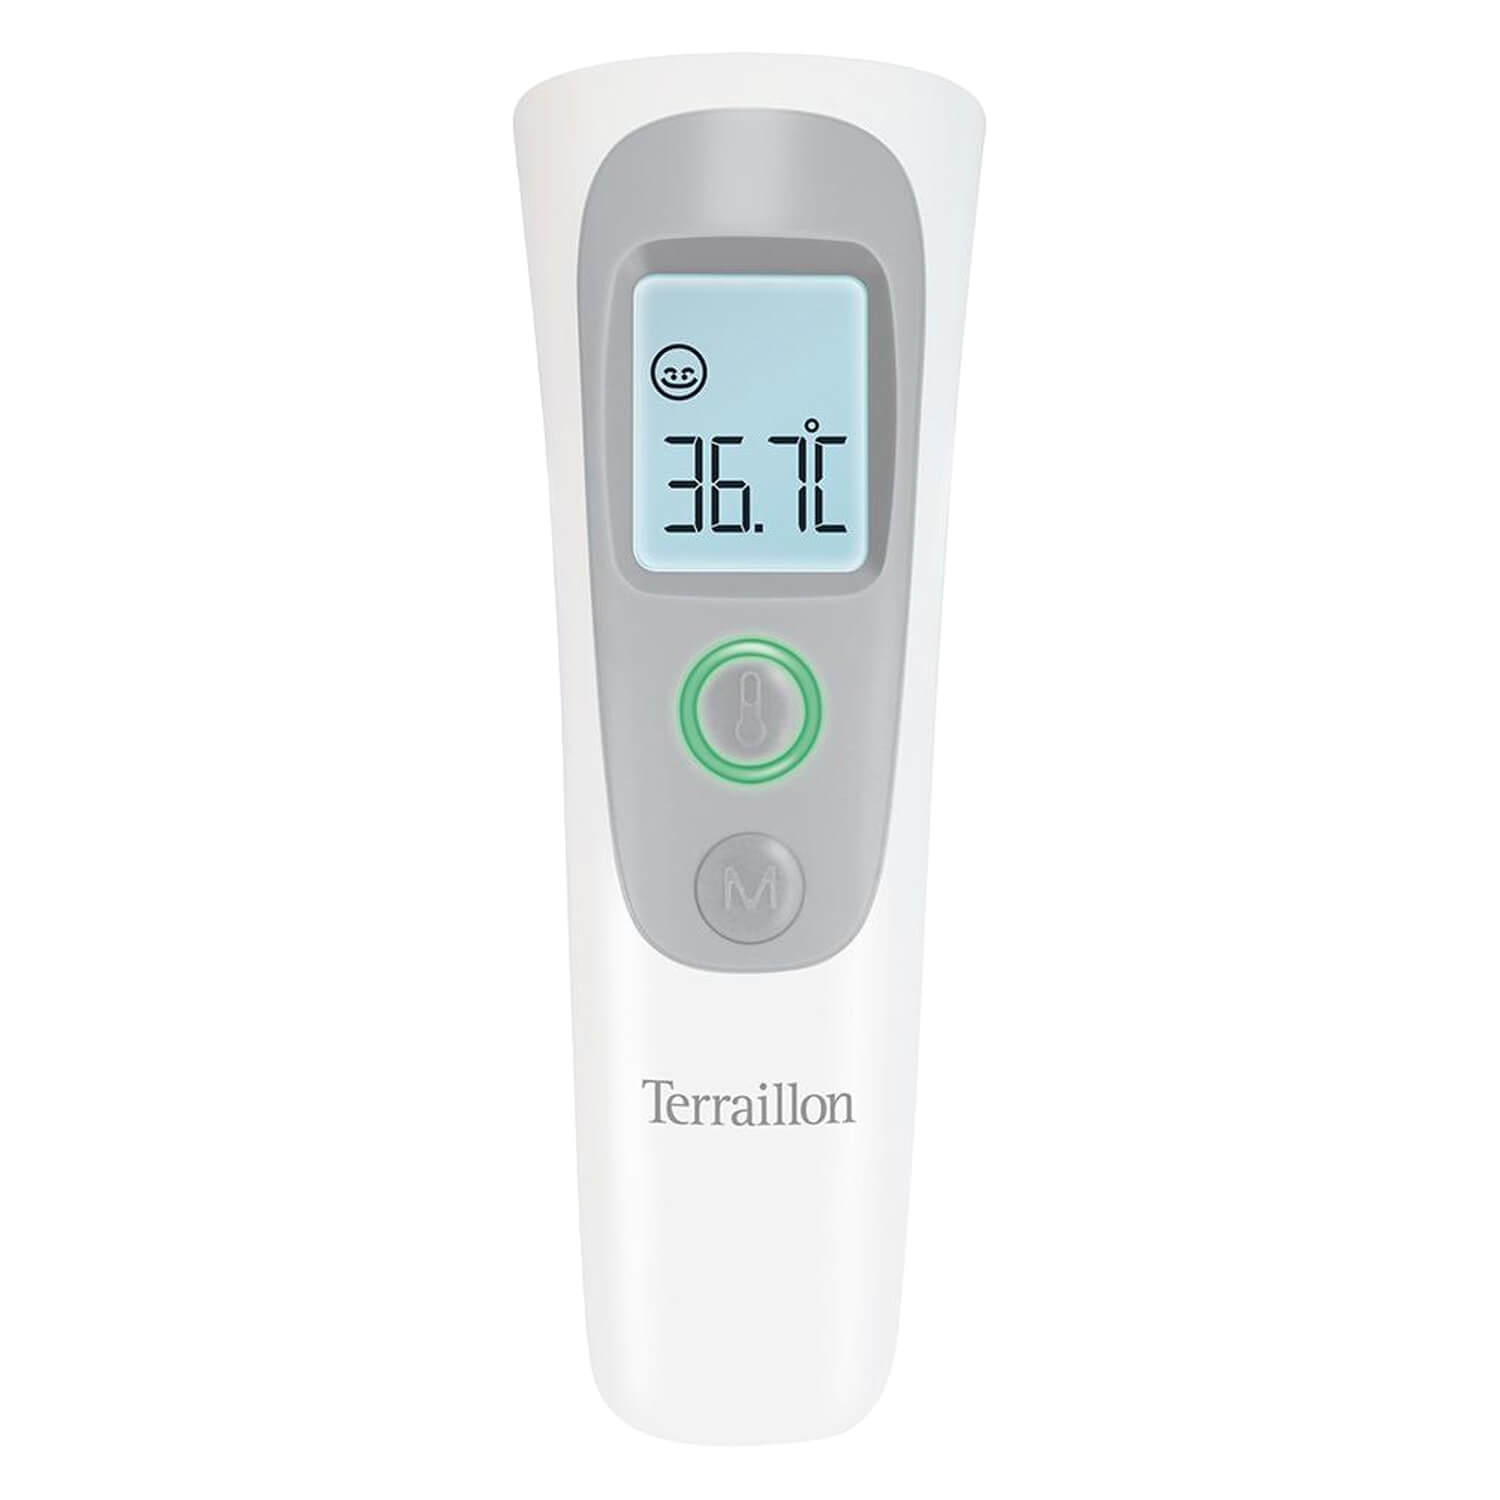 Product image from Terraillon - Kontaktloses Infrarot Thermometer